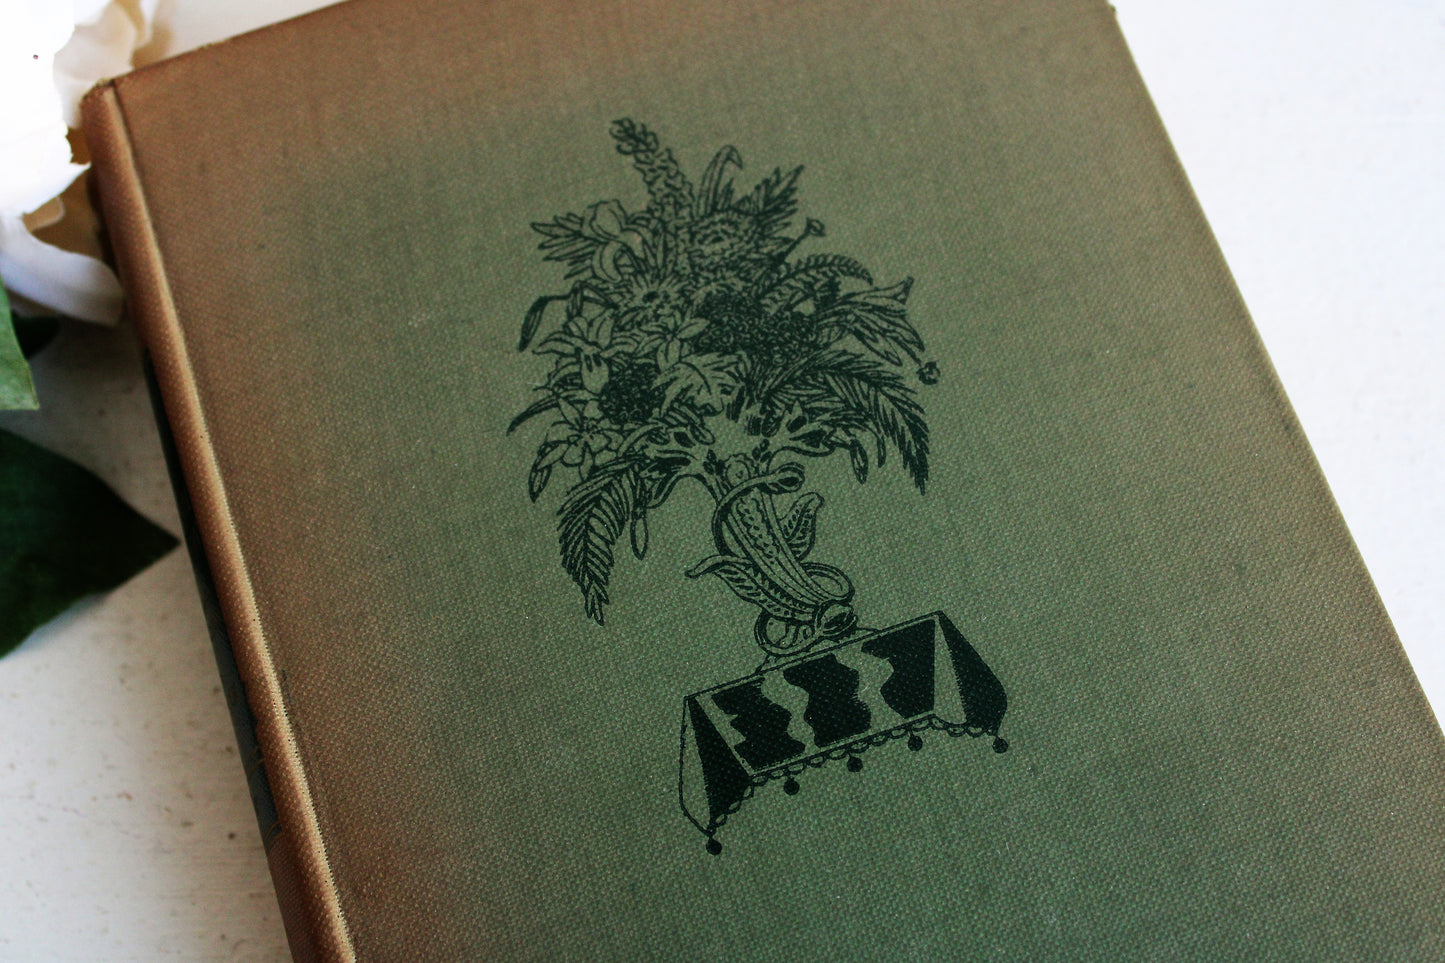 Vintage 1940s Book  "Favorite Poems of Henry Wadsworth Longfellow", First Edition